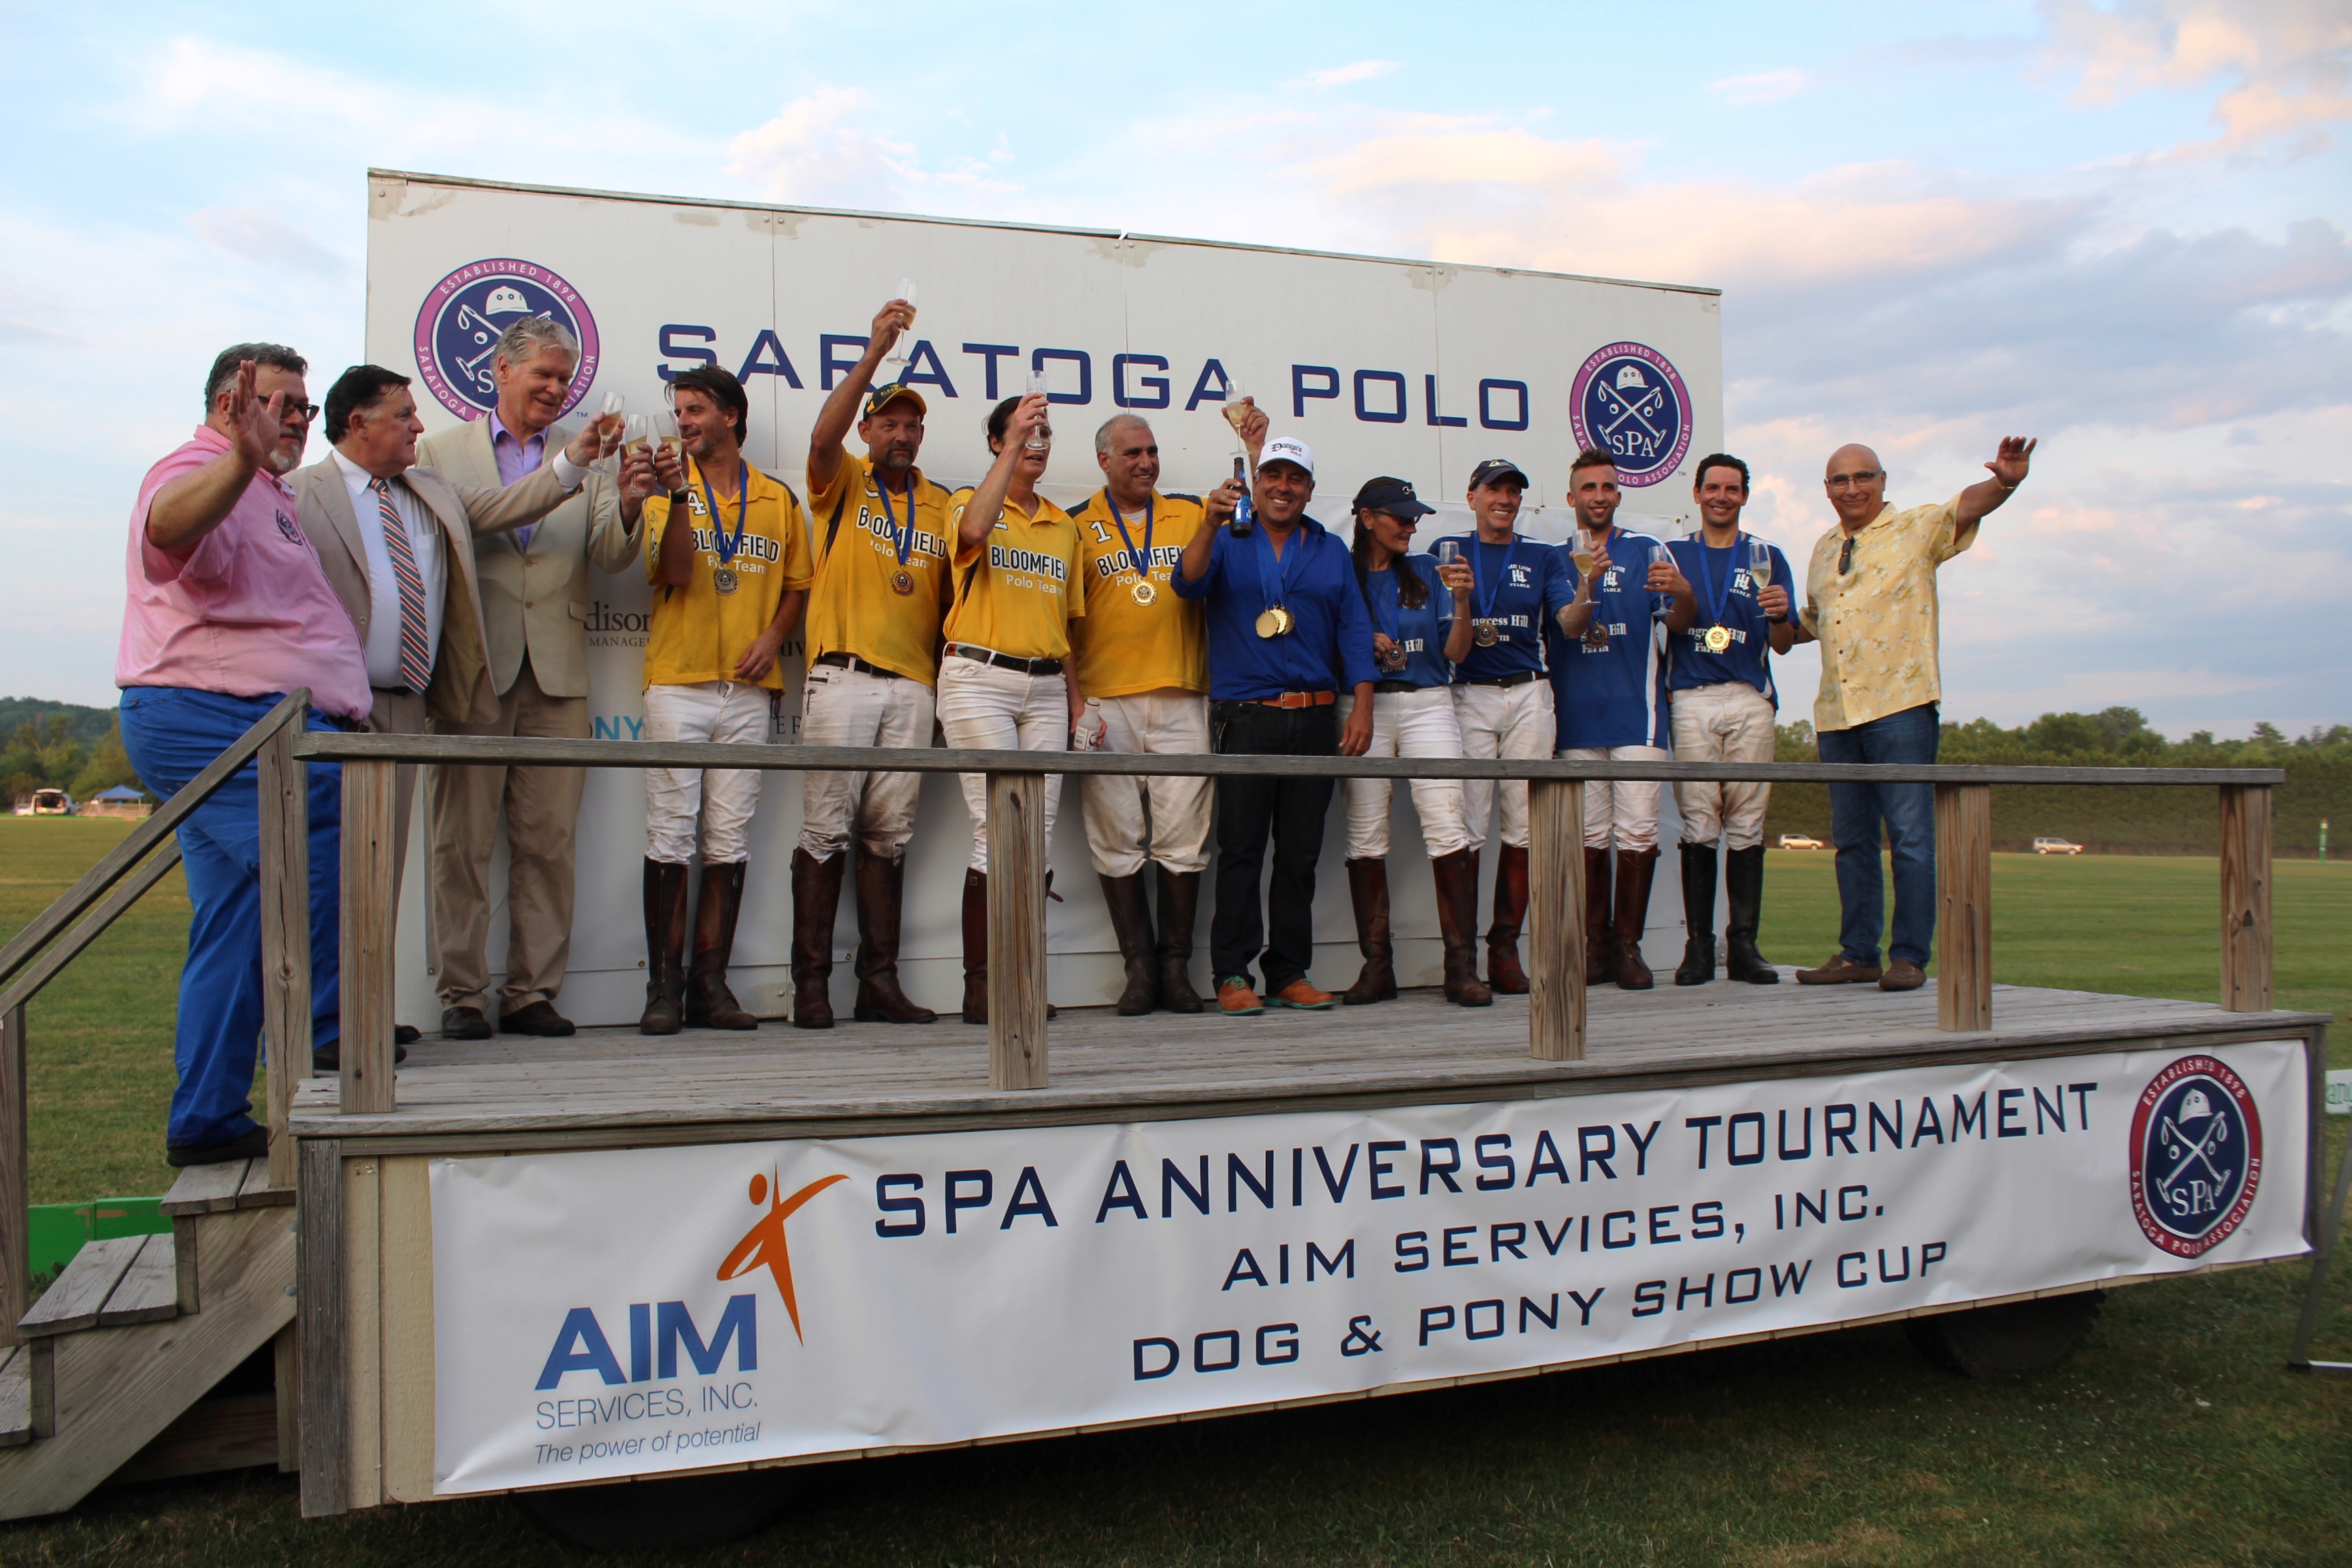 Polo teams on stage cheersing at the Saratoga Dog & Pony Show to benefit AIM Services, Inc.